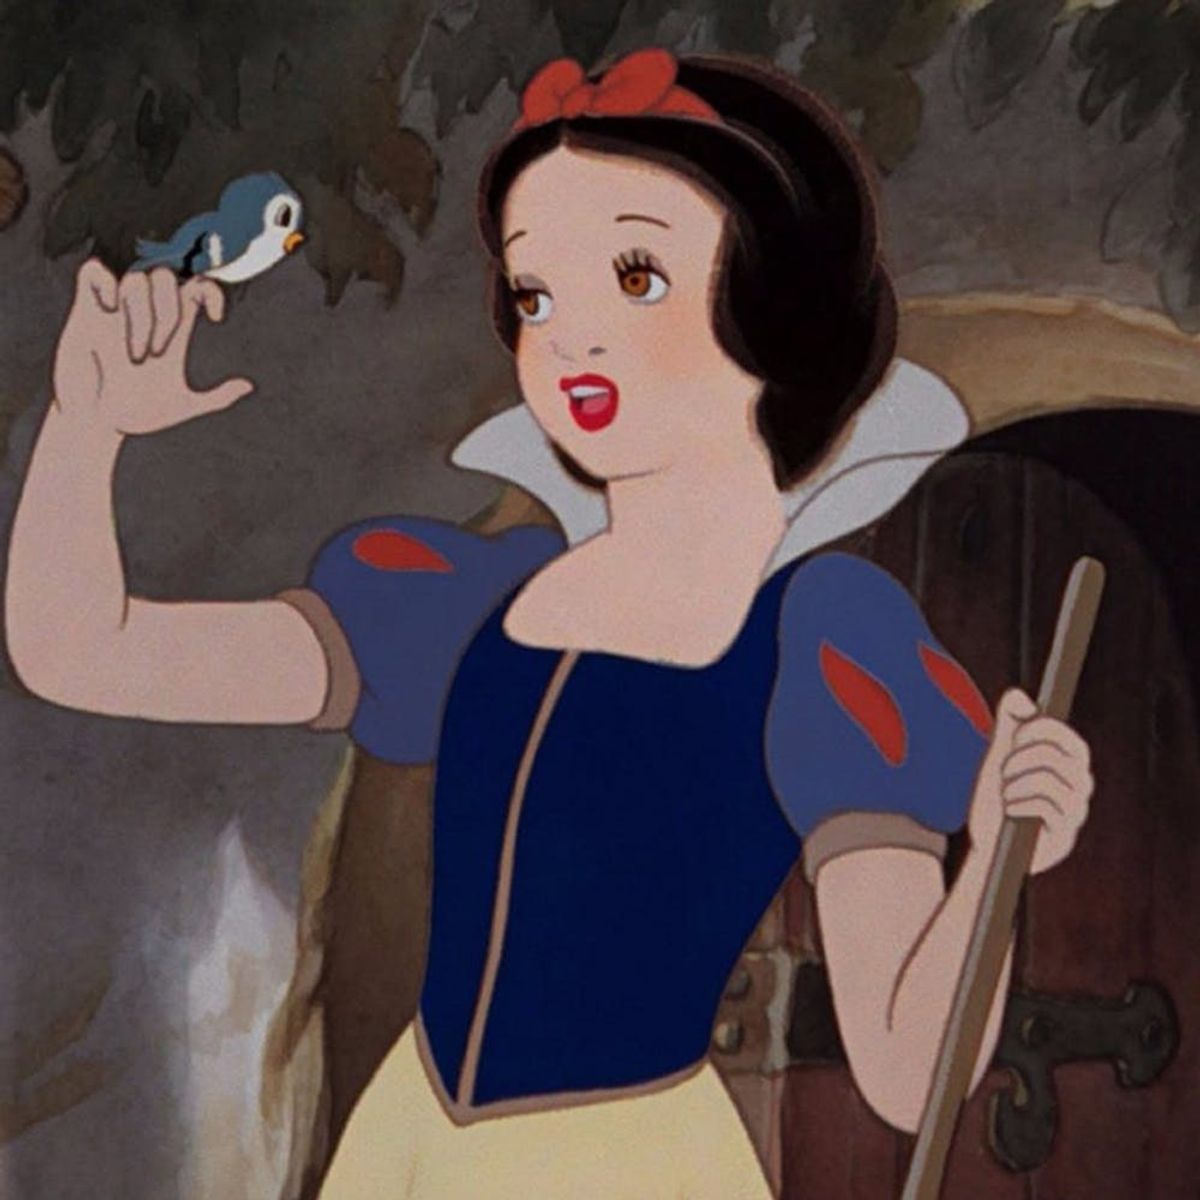 Brace Yourselves: A Live-Action Snow White Is in the Works